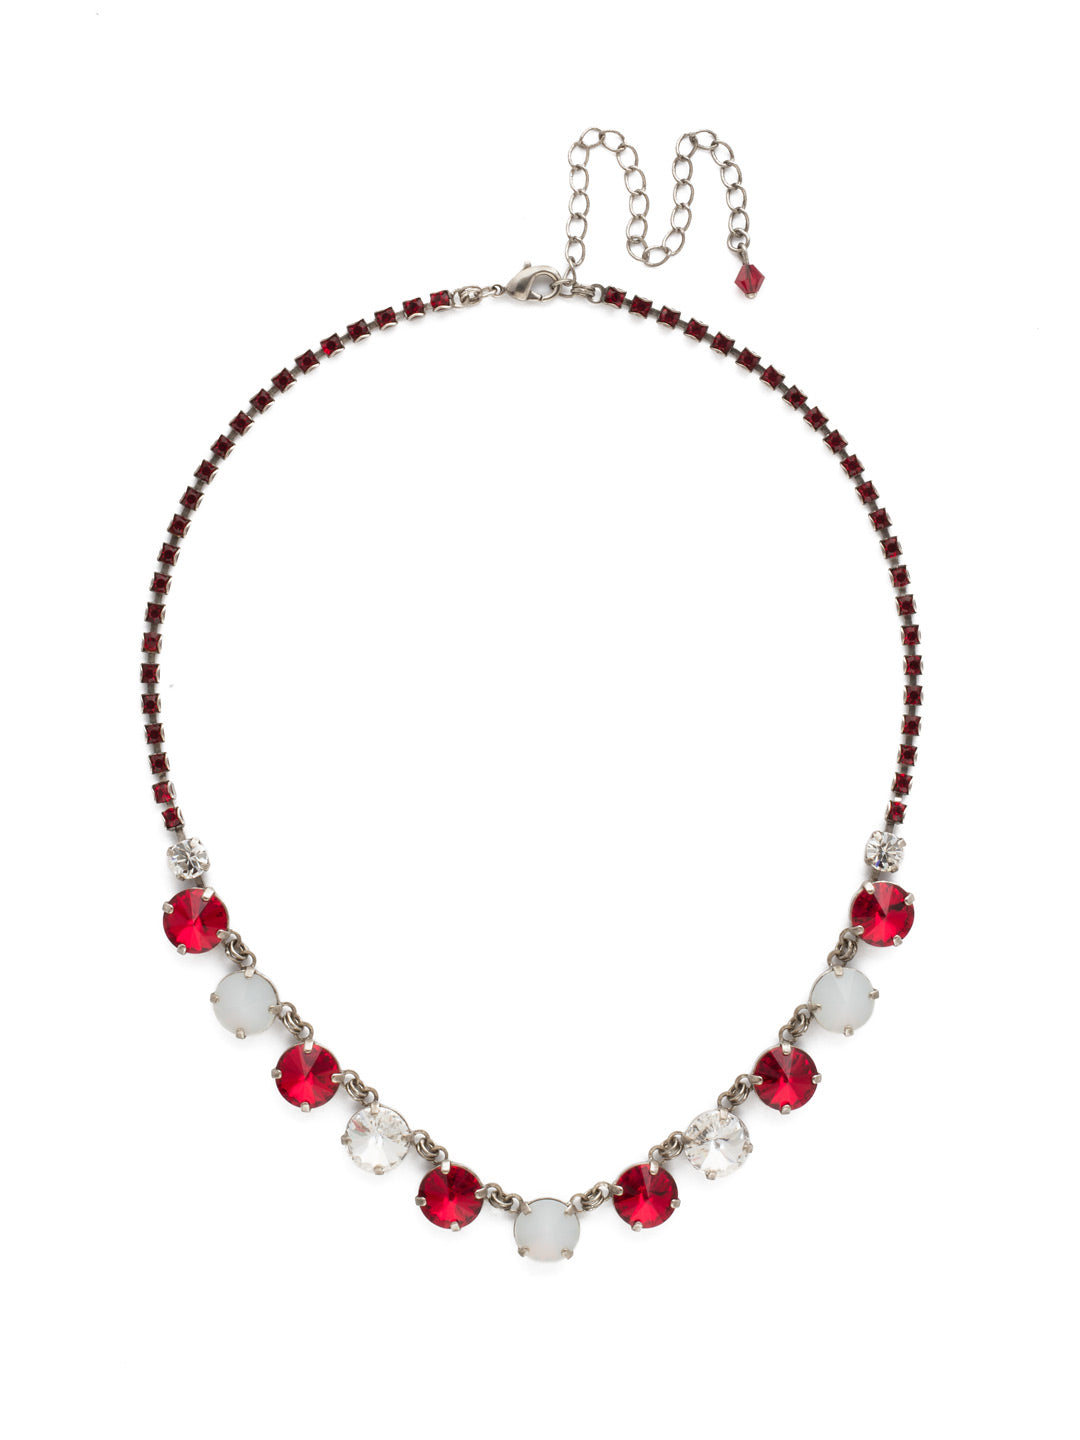 Simply Sophisticated Line Necklace - NDK6ASCP